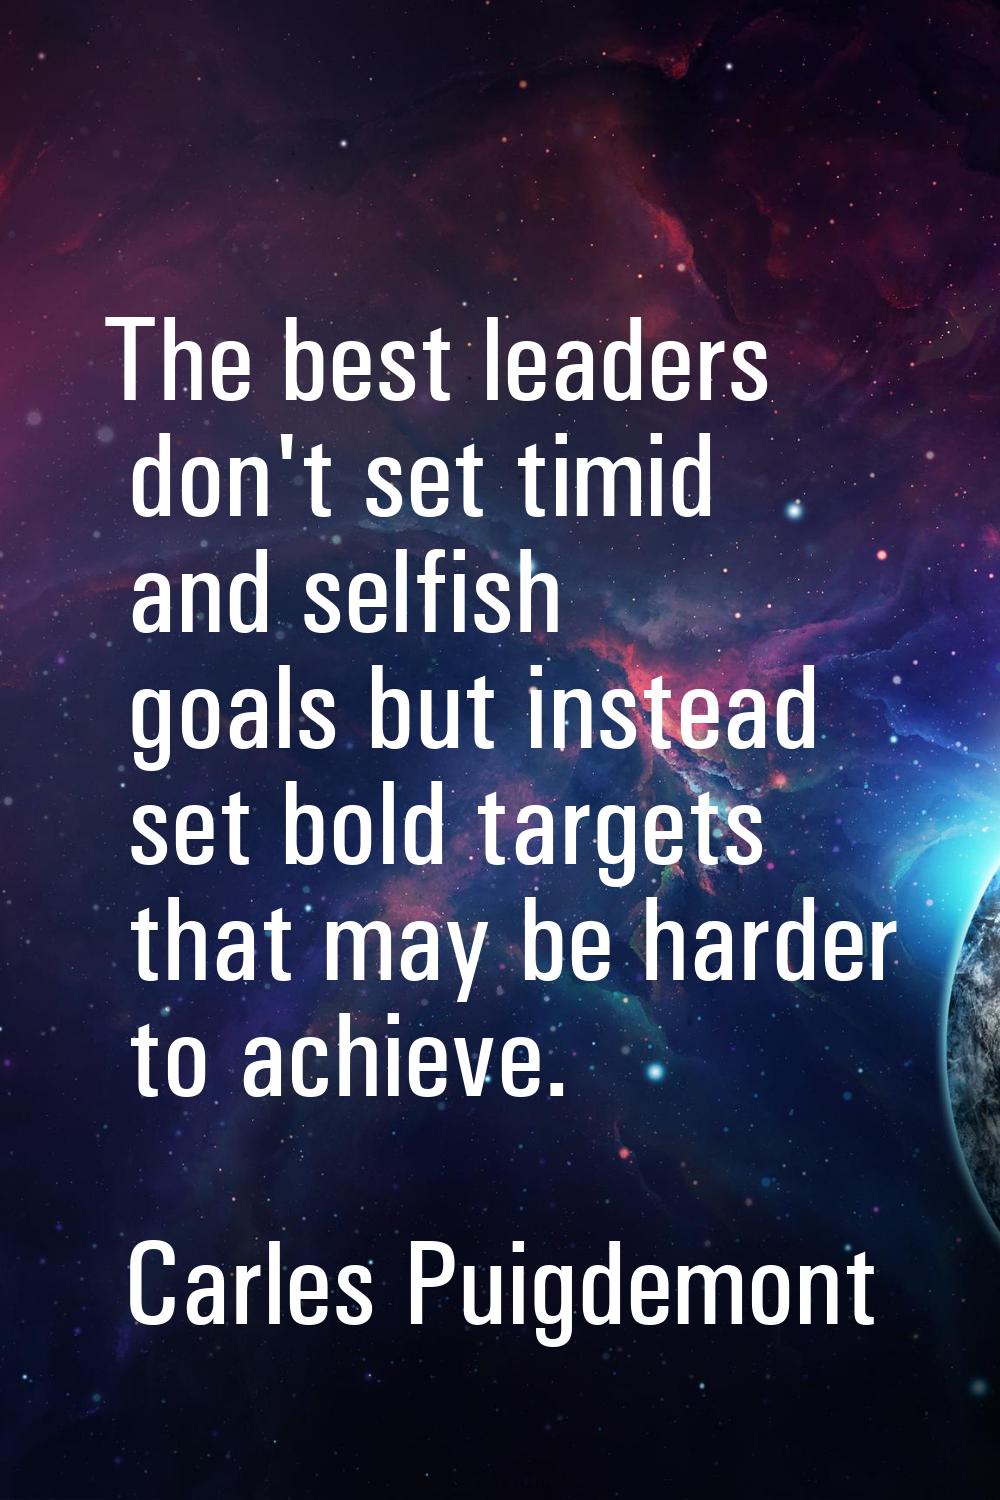 The best leaders don't set timid and selfish goals but instead set bold targets that may be harder 